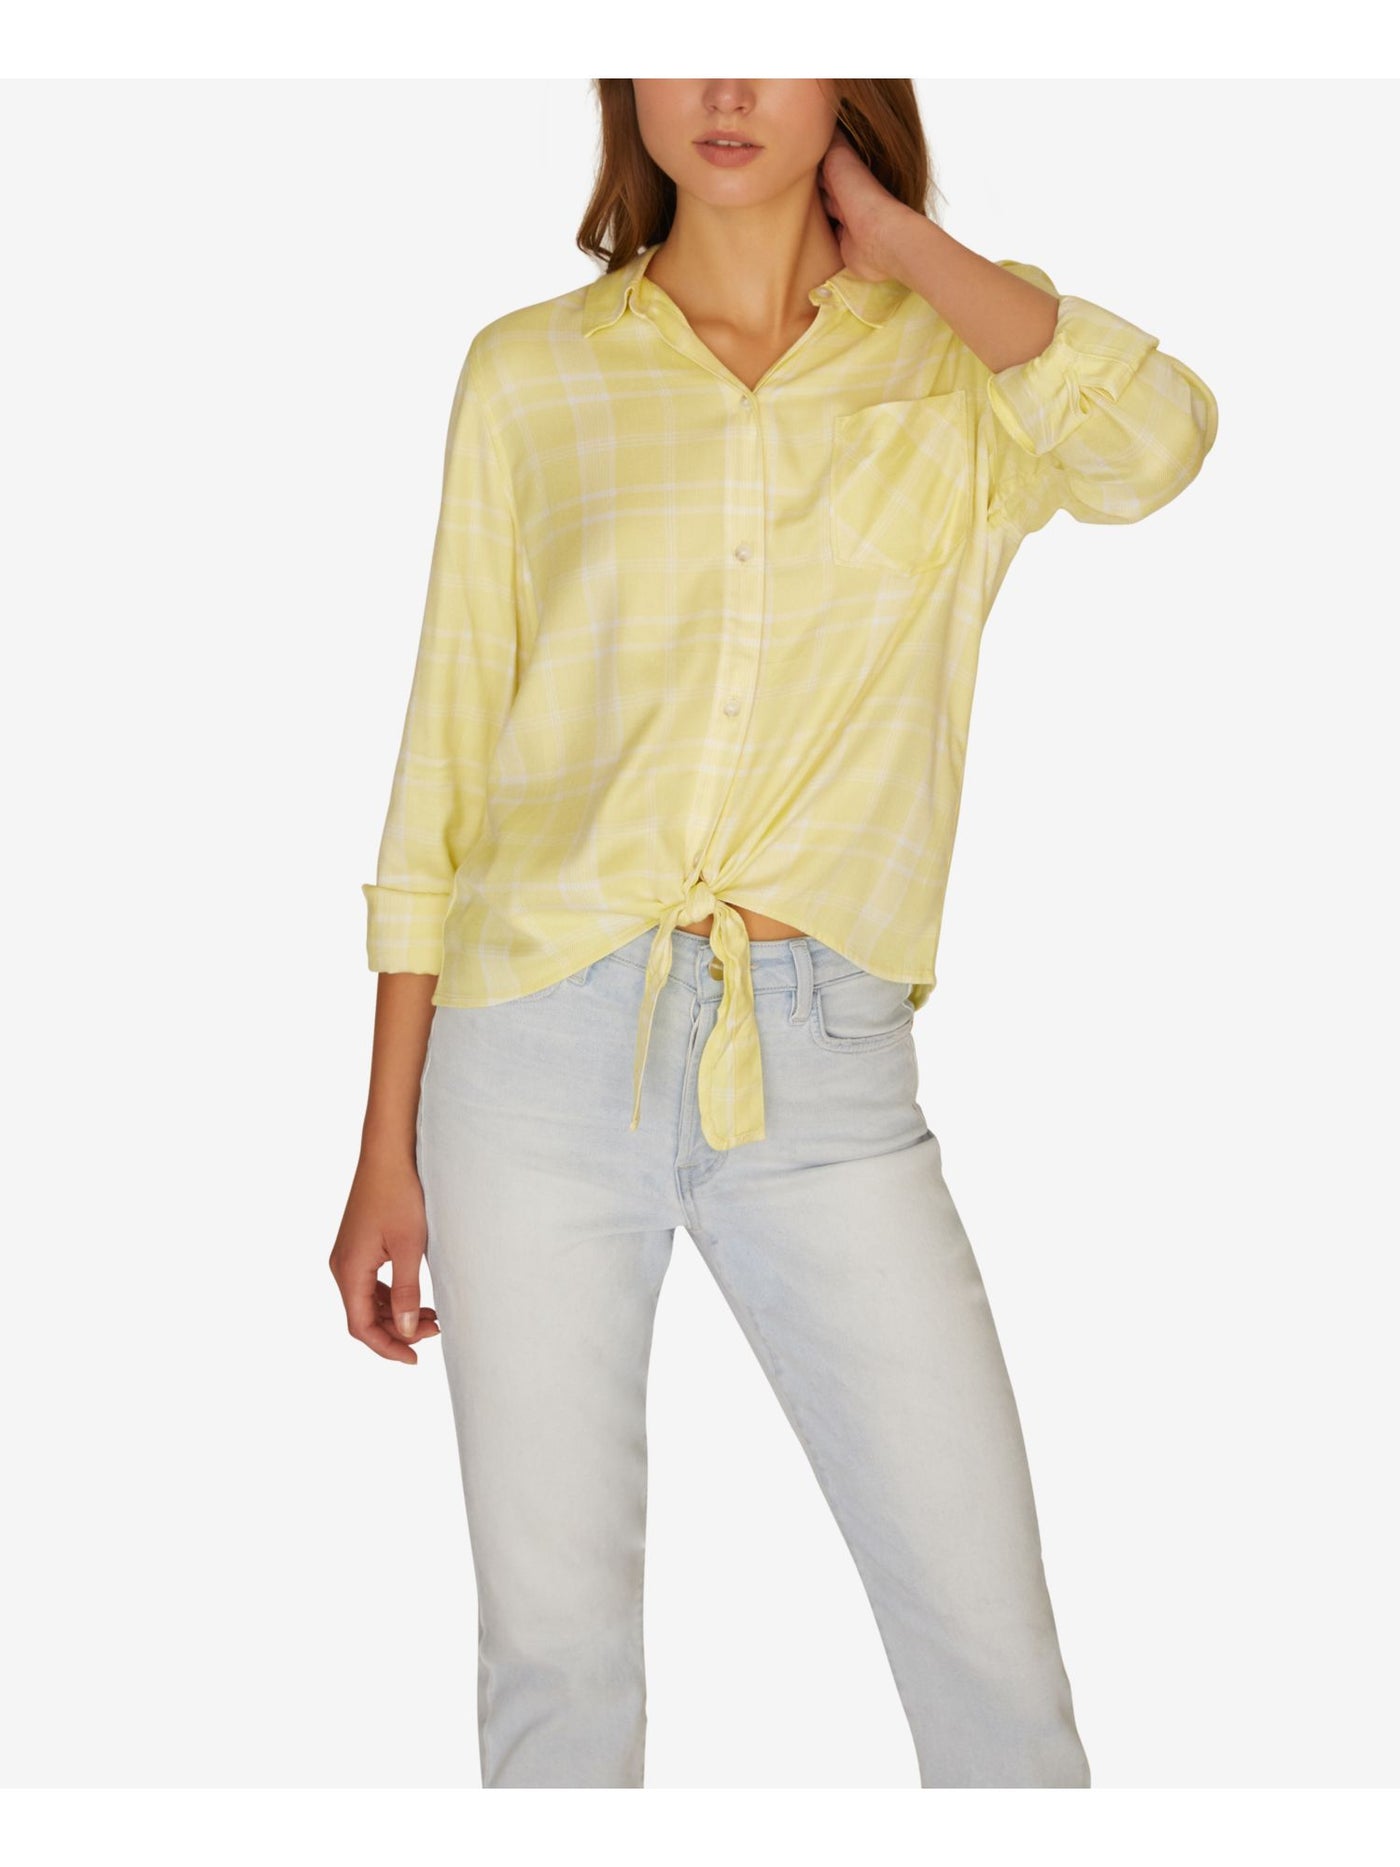 SANCTUARY Womens Yellow Pocketed Tie Front Plaid Long Sleeve Collared Button Up Top XS